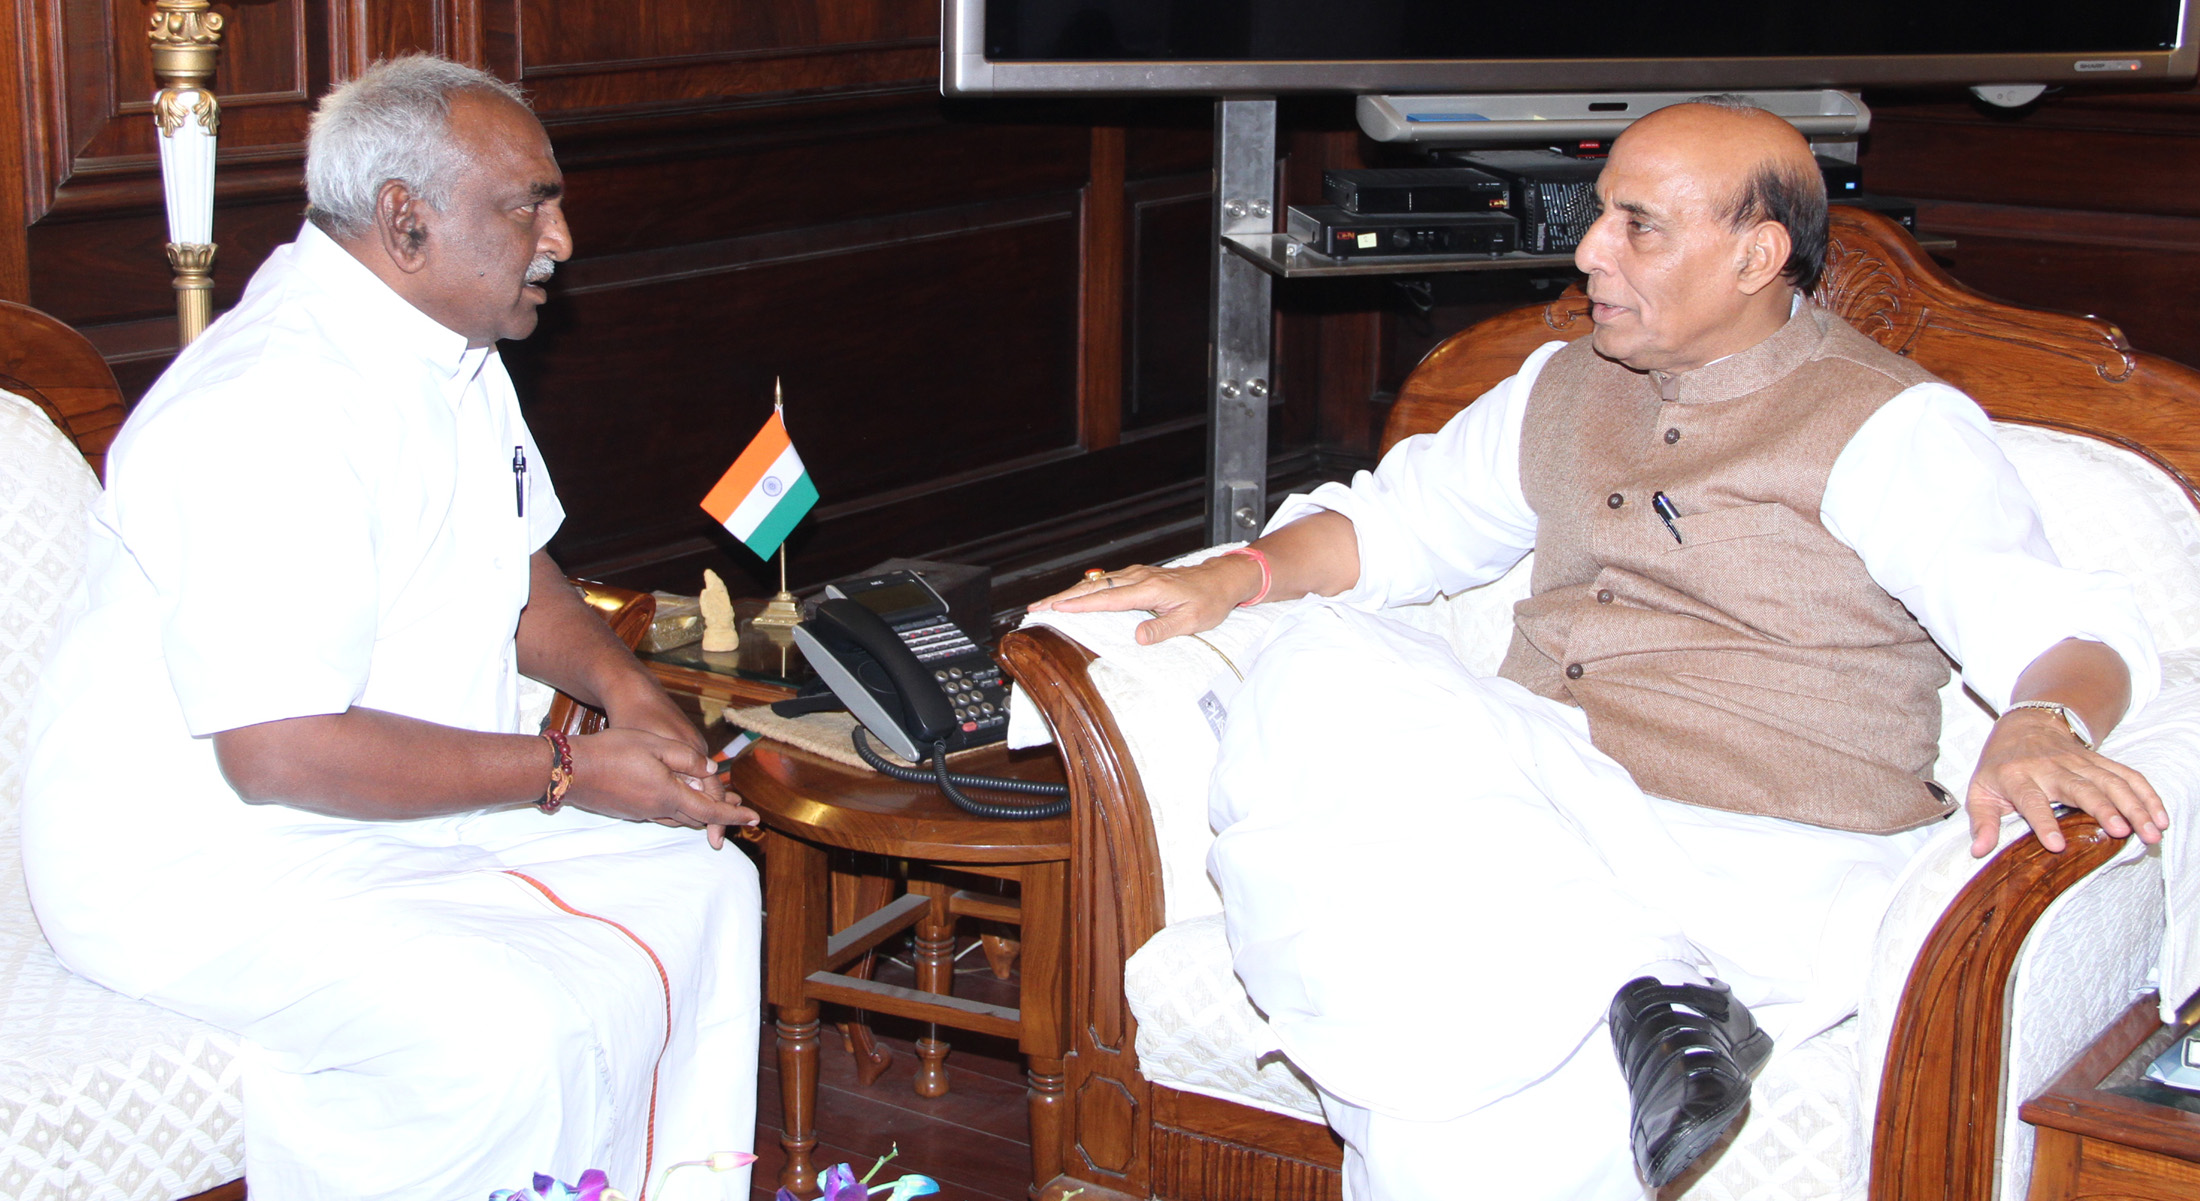 The Minister of State for Road Transport & Highways and Shipping, Shri P. Radhakrishnan calling on the Union Home Minister, Shri Rajnath Singh, in New Delhi on March 01, 2016.